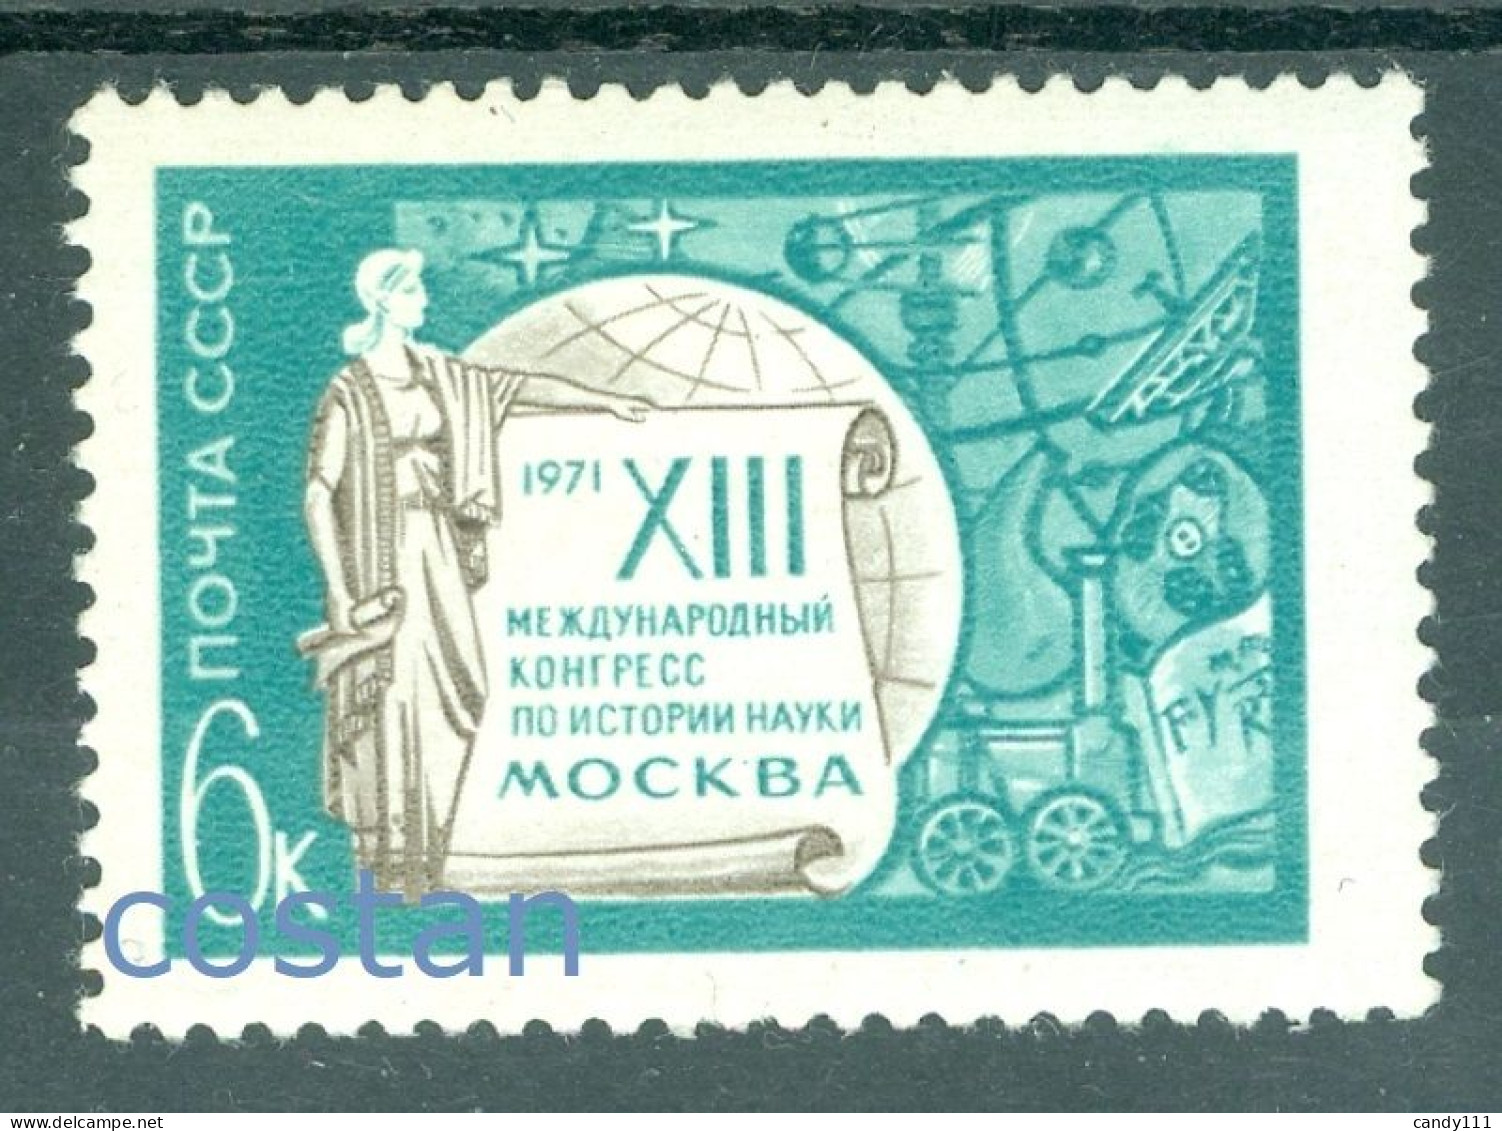 1971 History Of Science Congress/Moscow,locomotive,antenna,star,Russia,3884,MNH - Unused Stamps